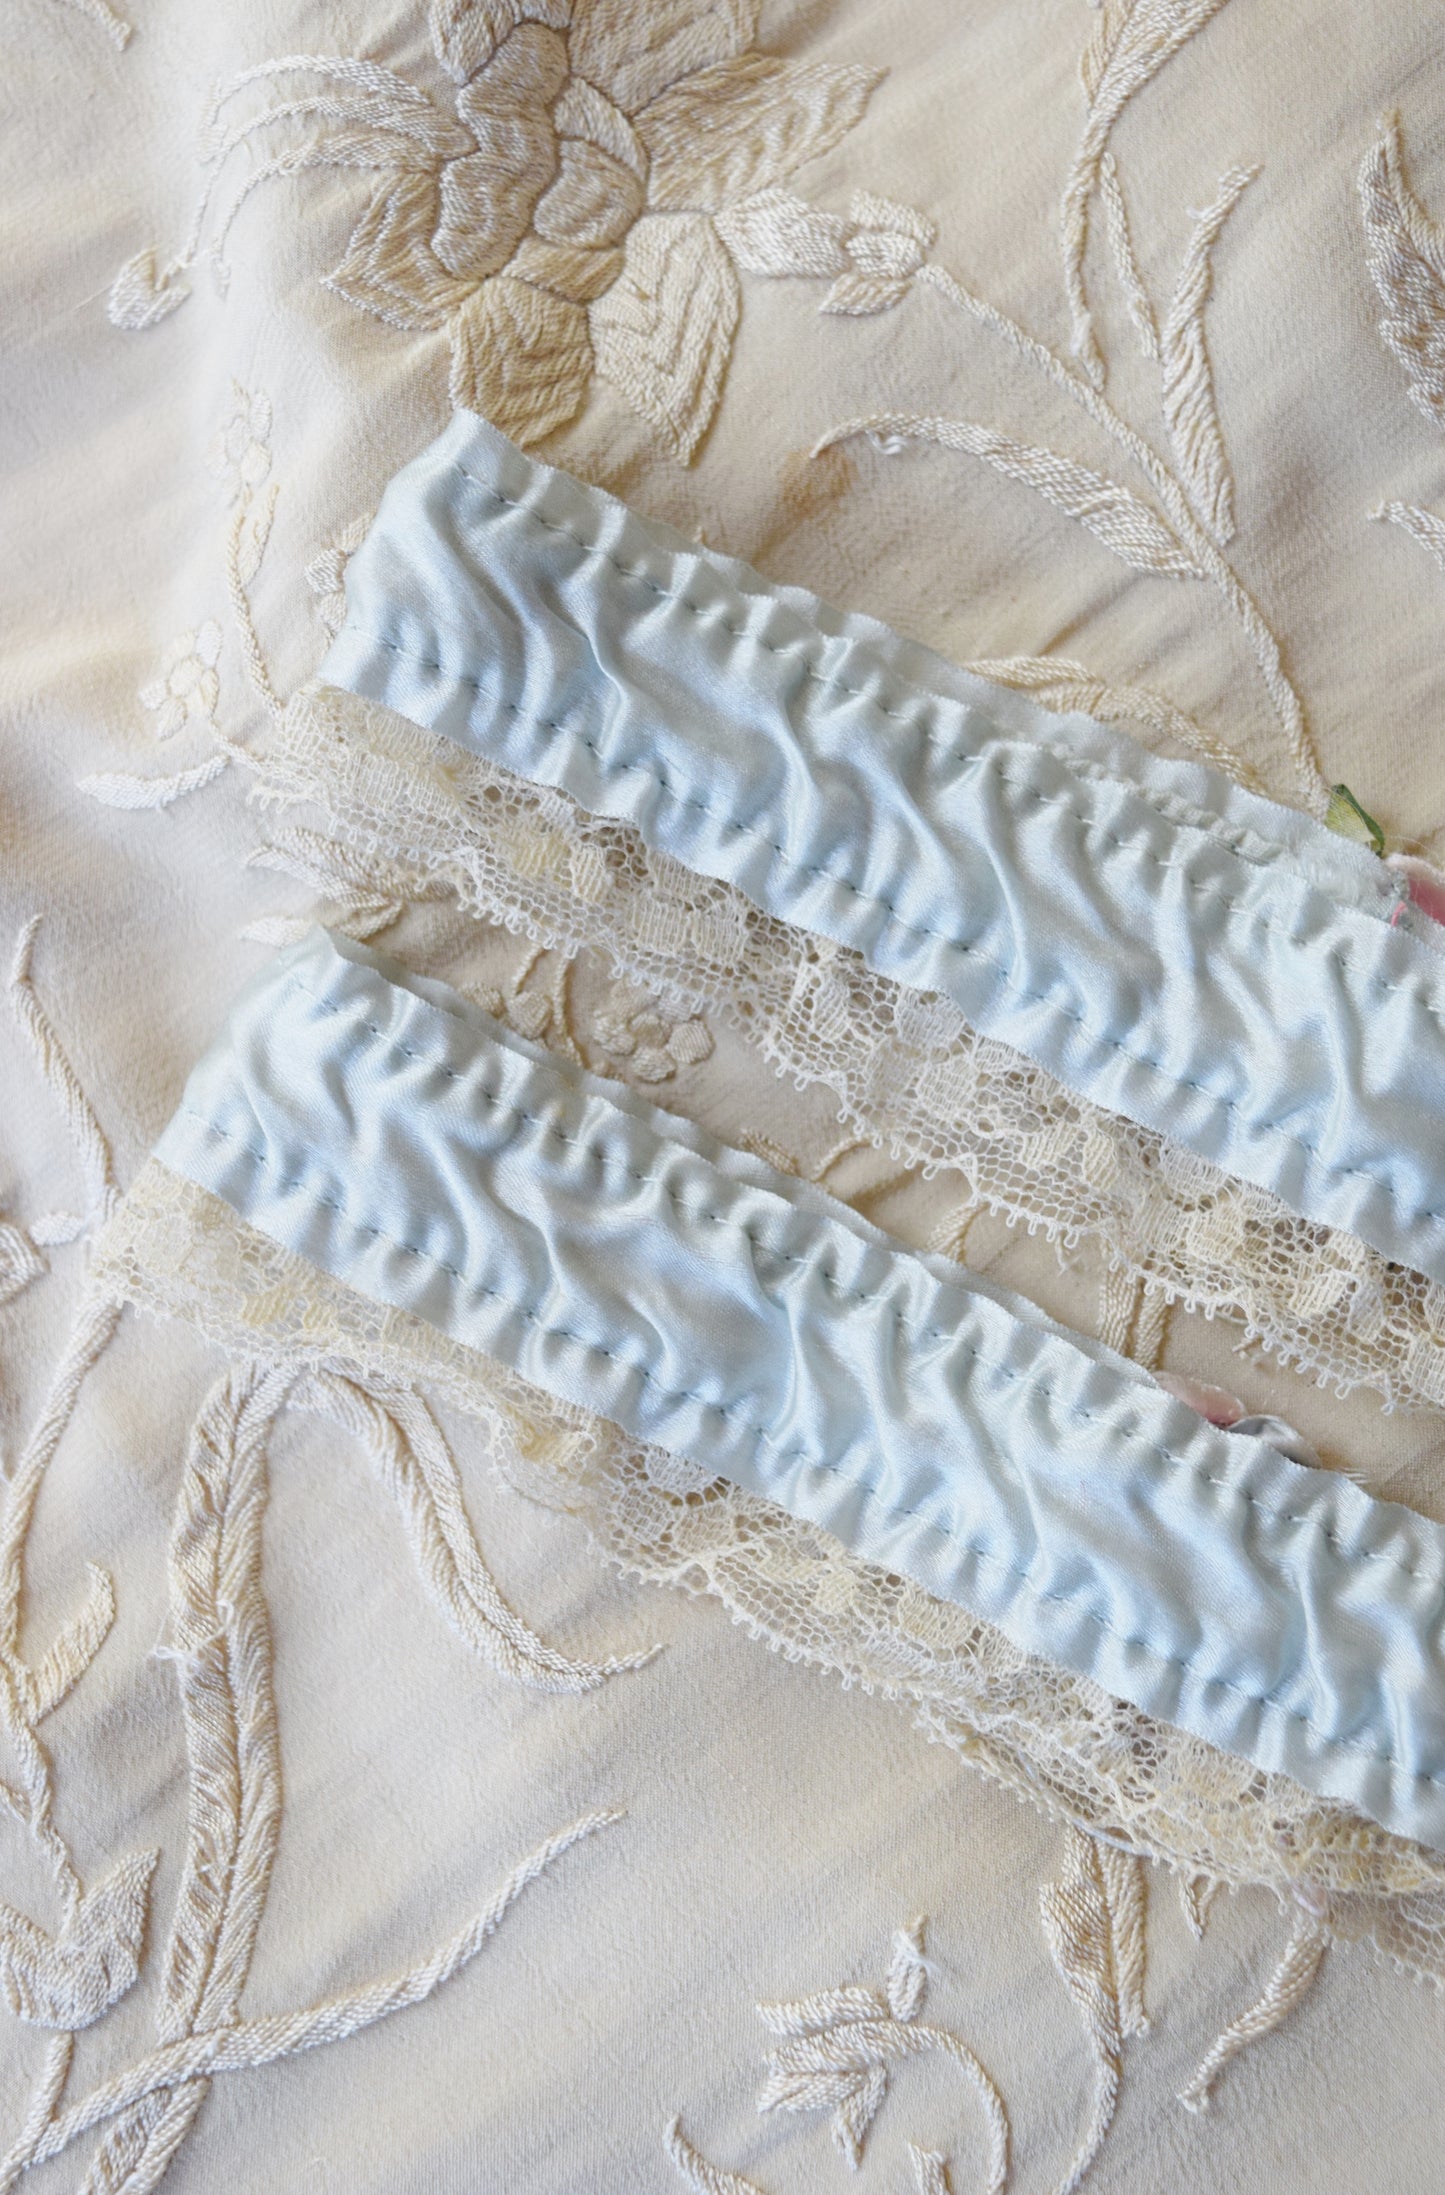 Baby Blue Silk Satin and Lace Garter Set | 1920s